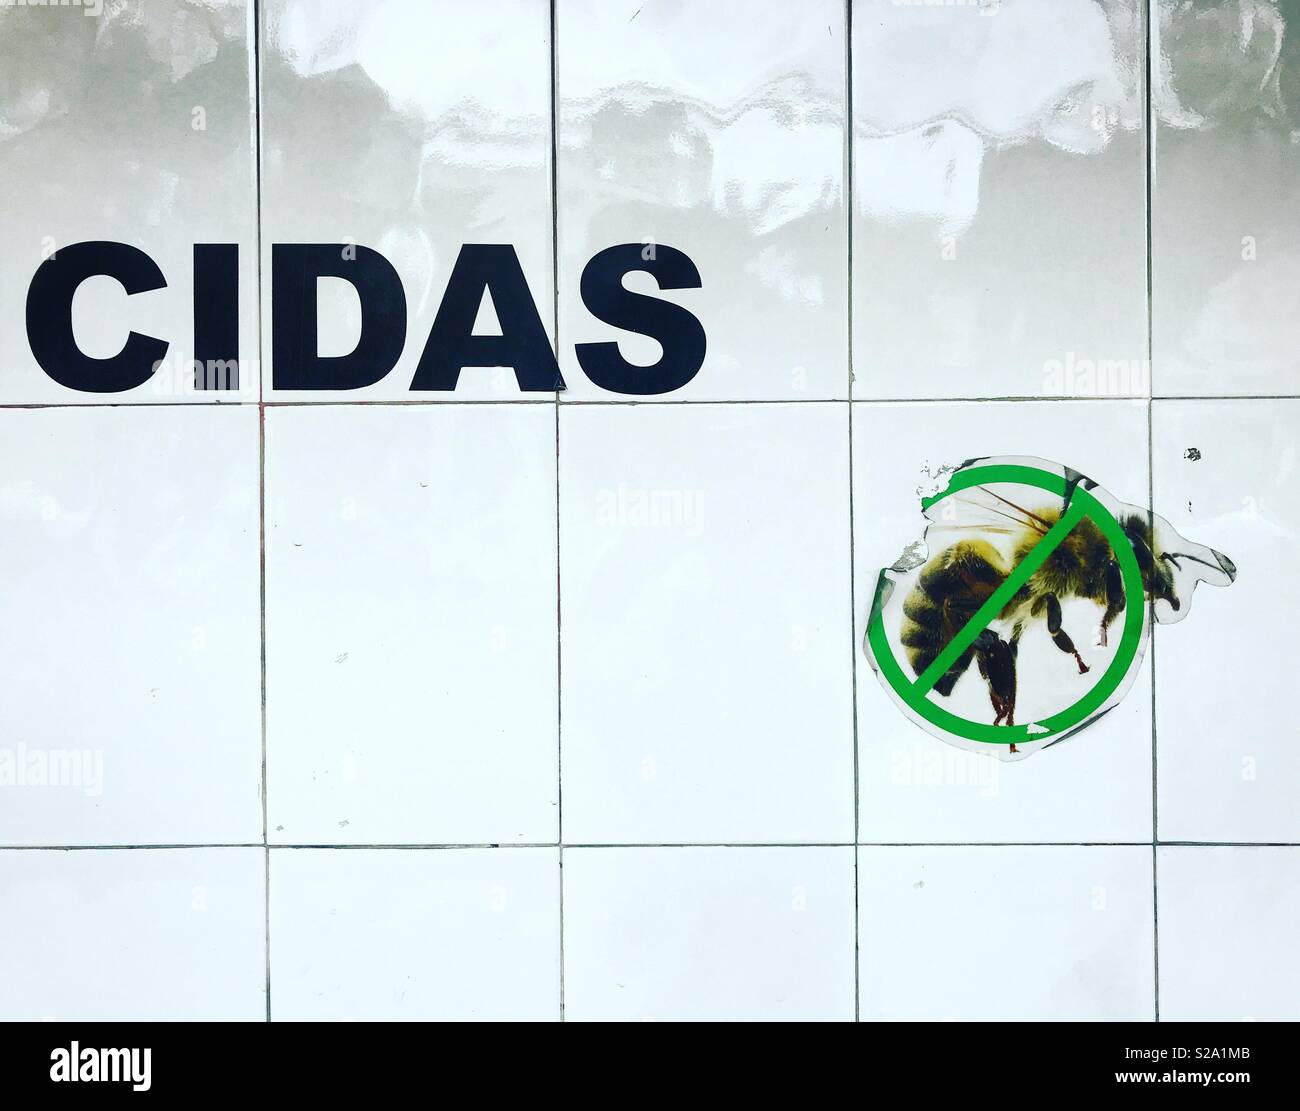 An advertising for killing honey bees pesticides in a poisons shop in Mexico City, Mexico. Cidas means “killers” or “deaths”. Stock Photo